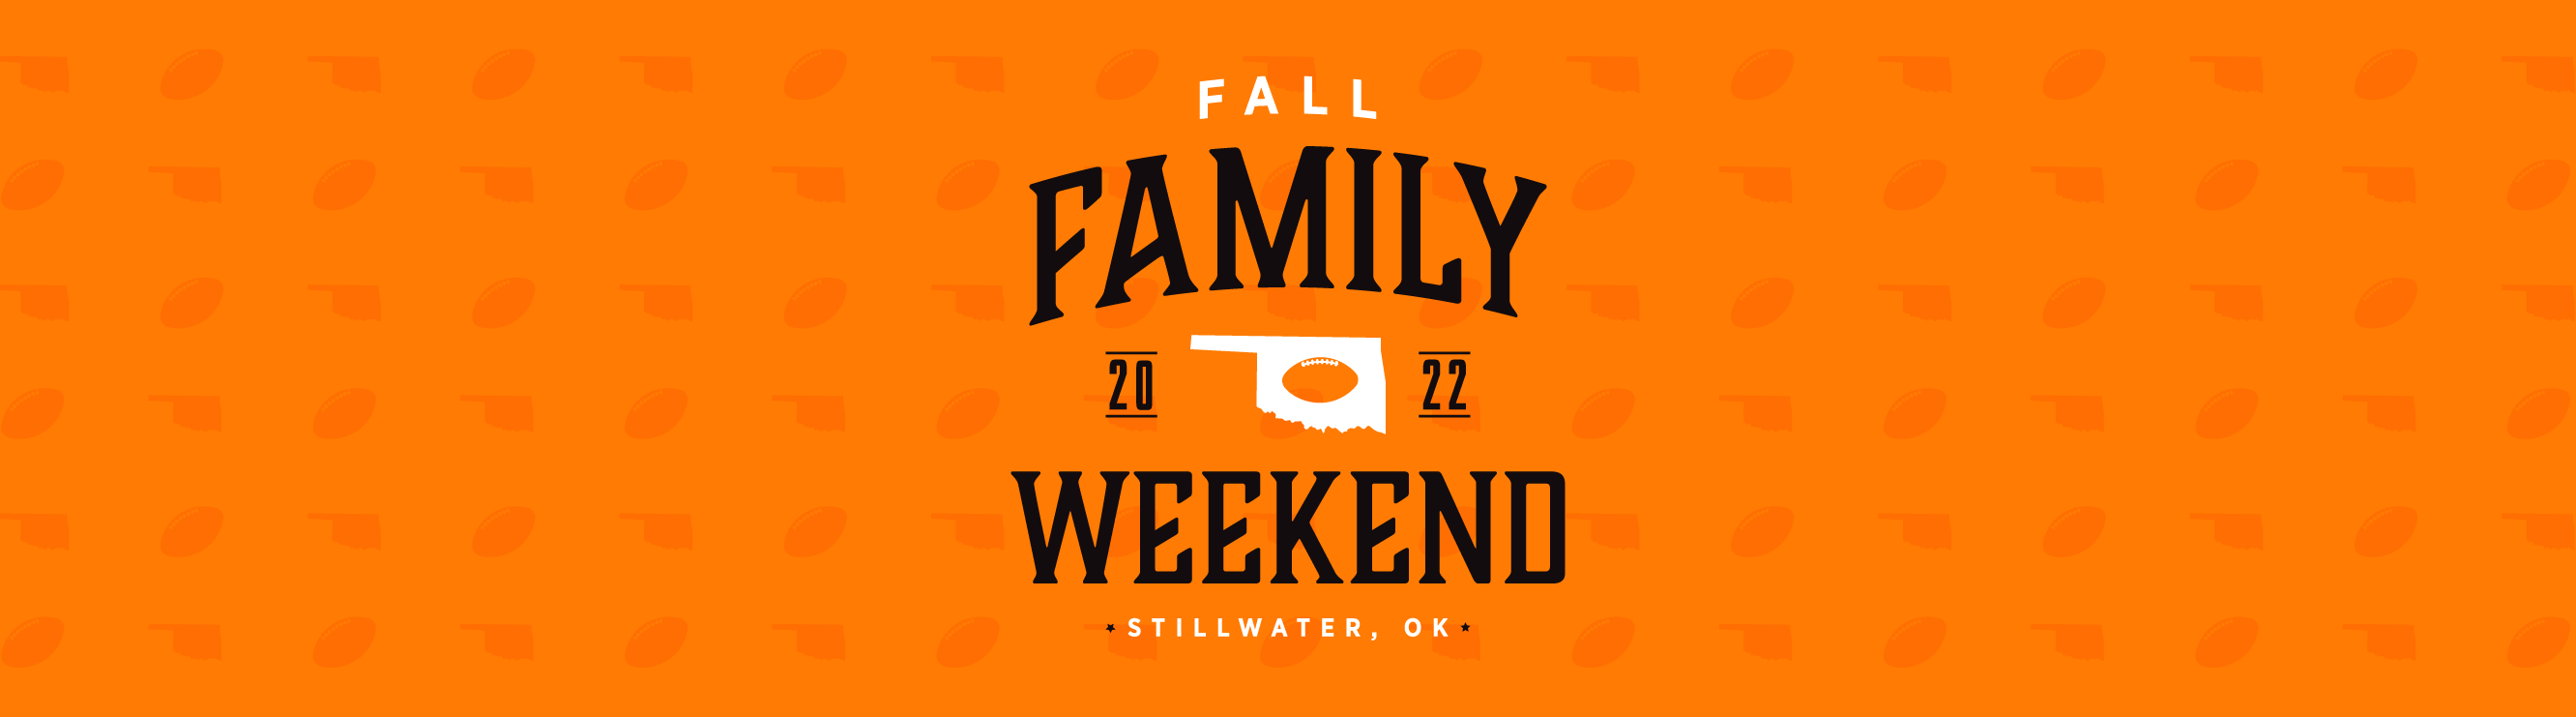 fall family weekend banner logo